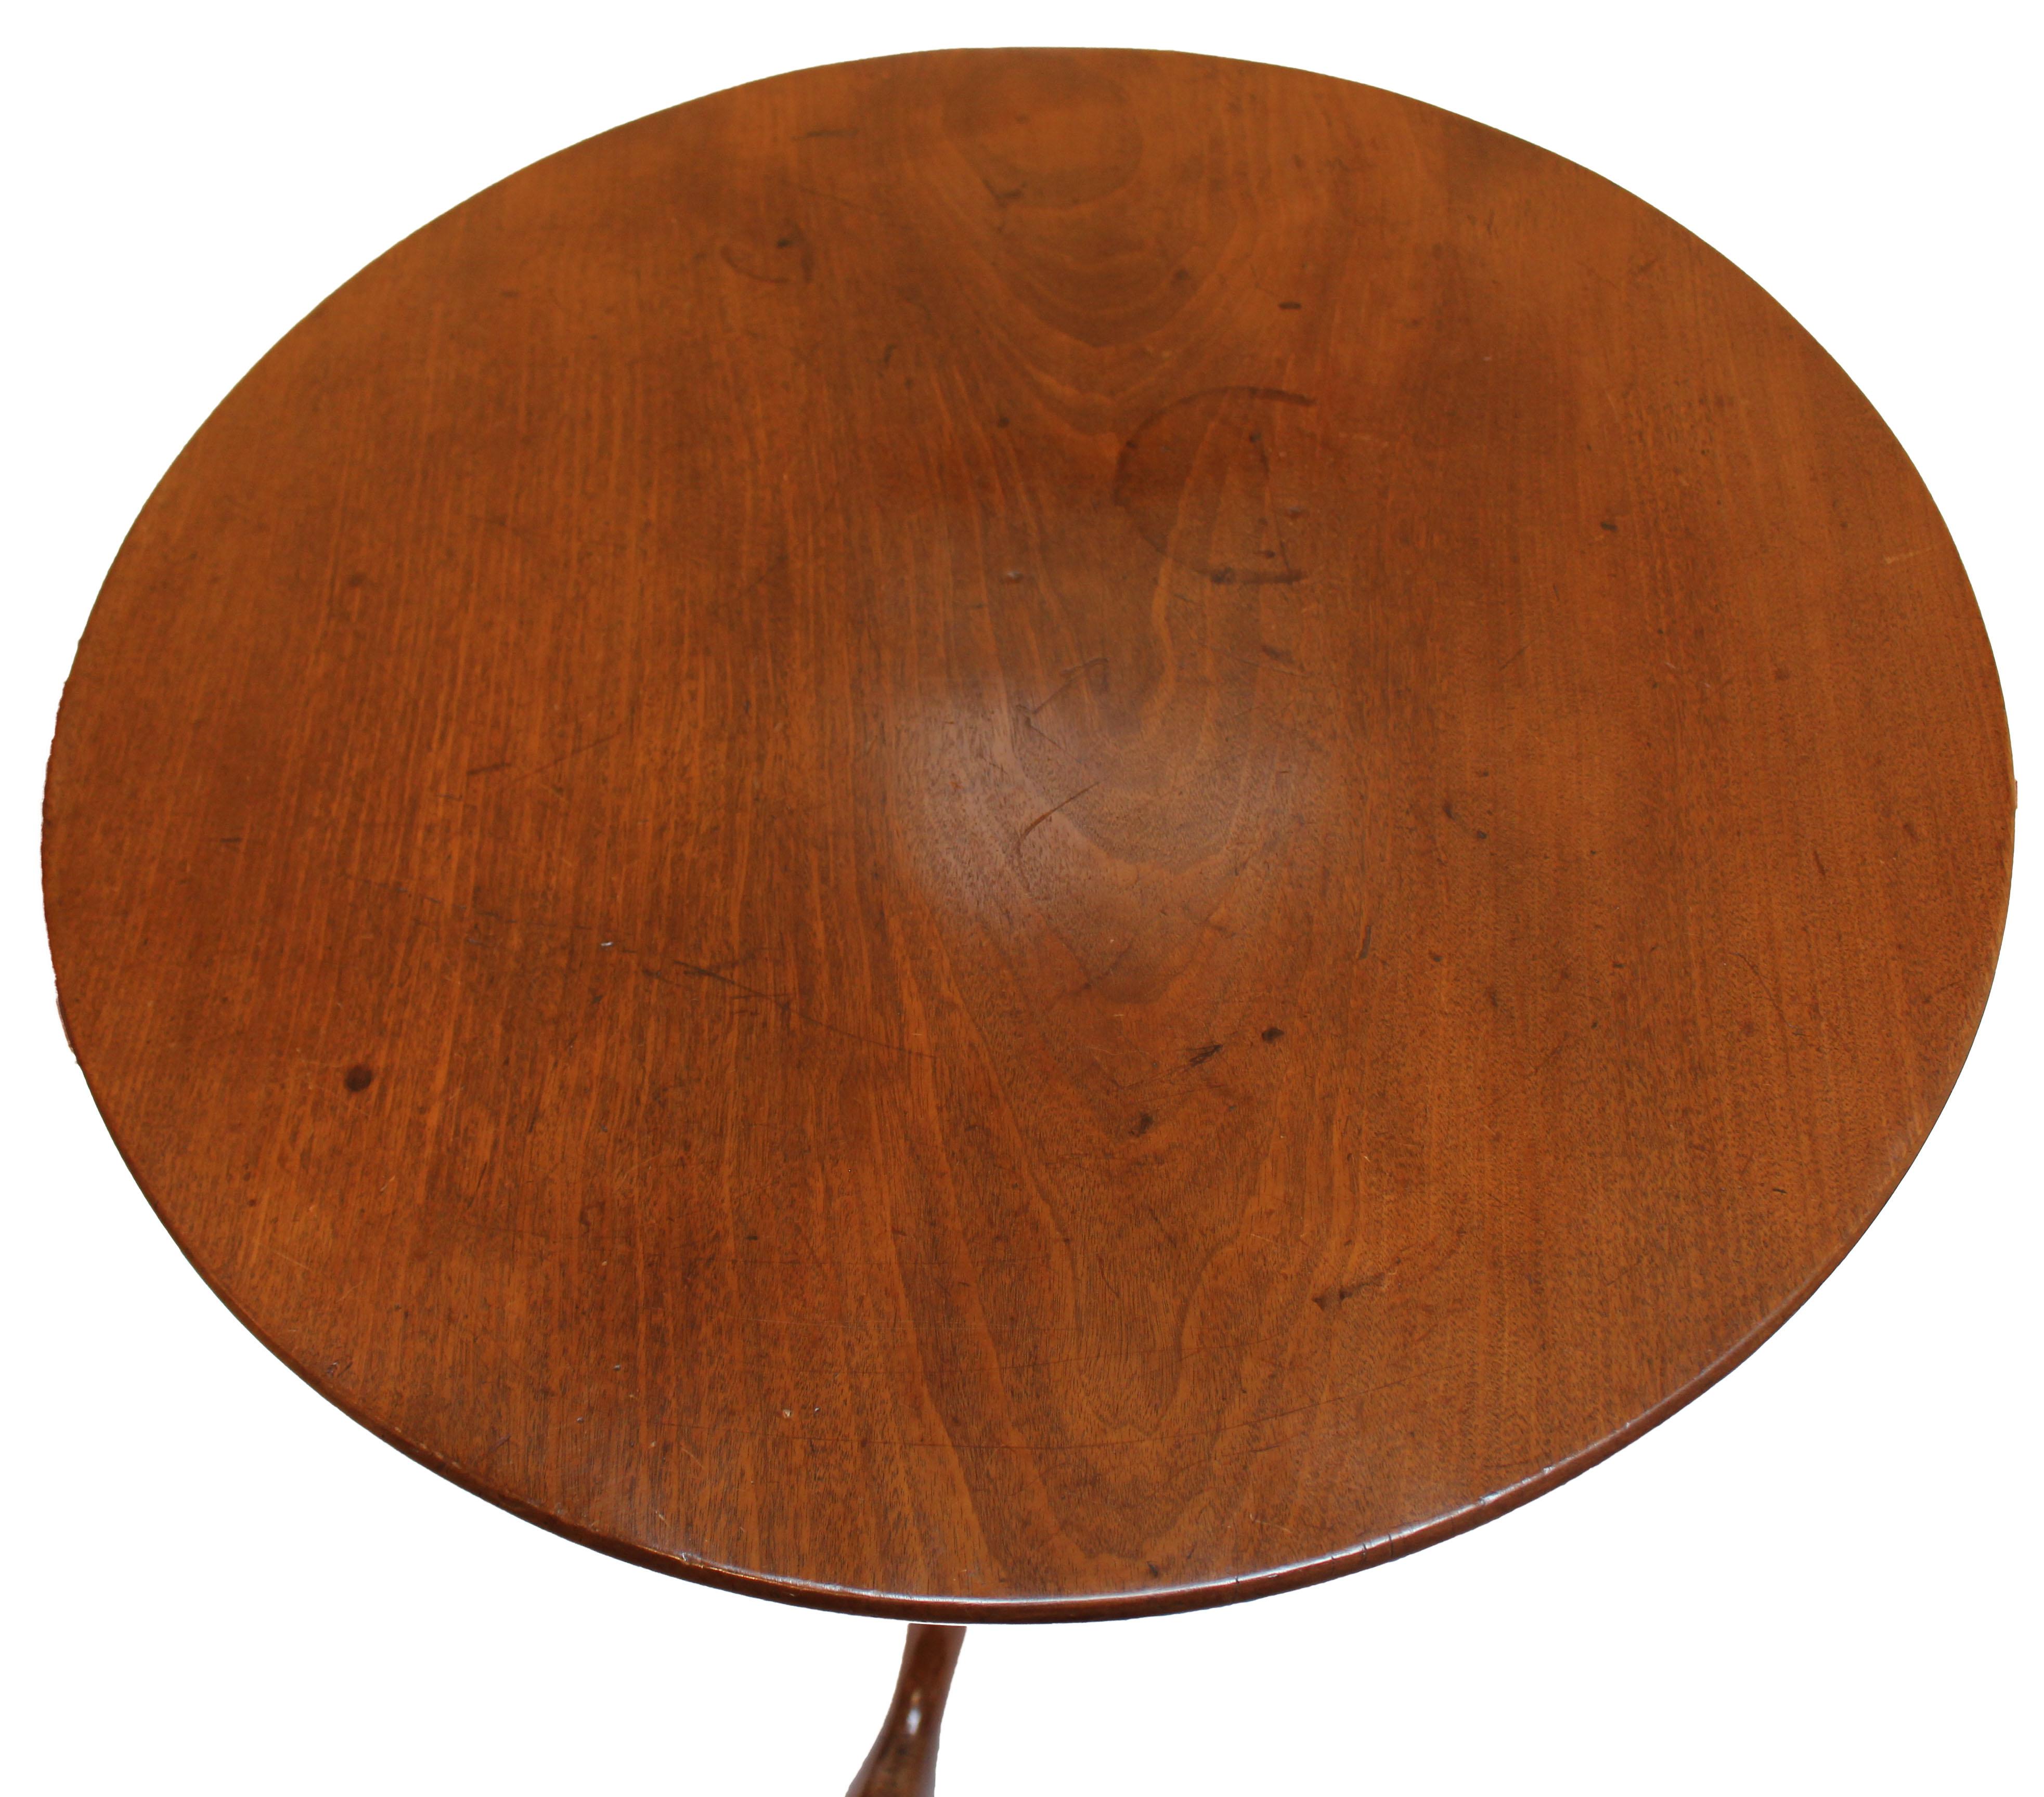 Circa 1780 George III Period Tilt-Top Tea Table, English In Good Condition For Sale In Chapel Hill, NC